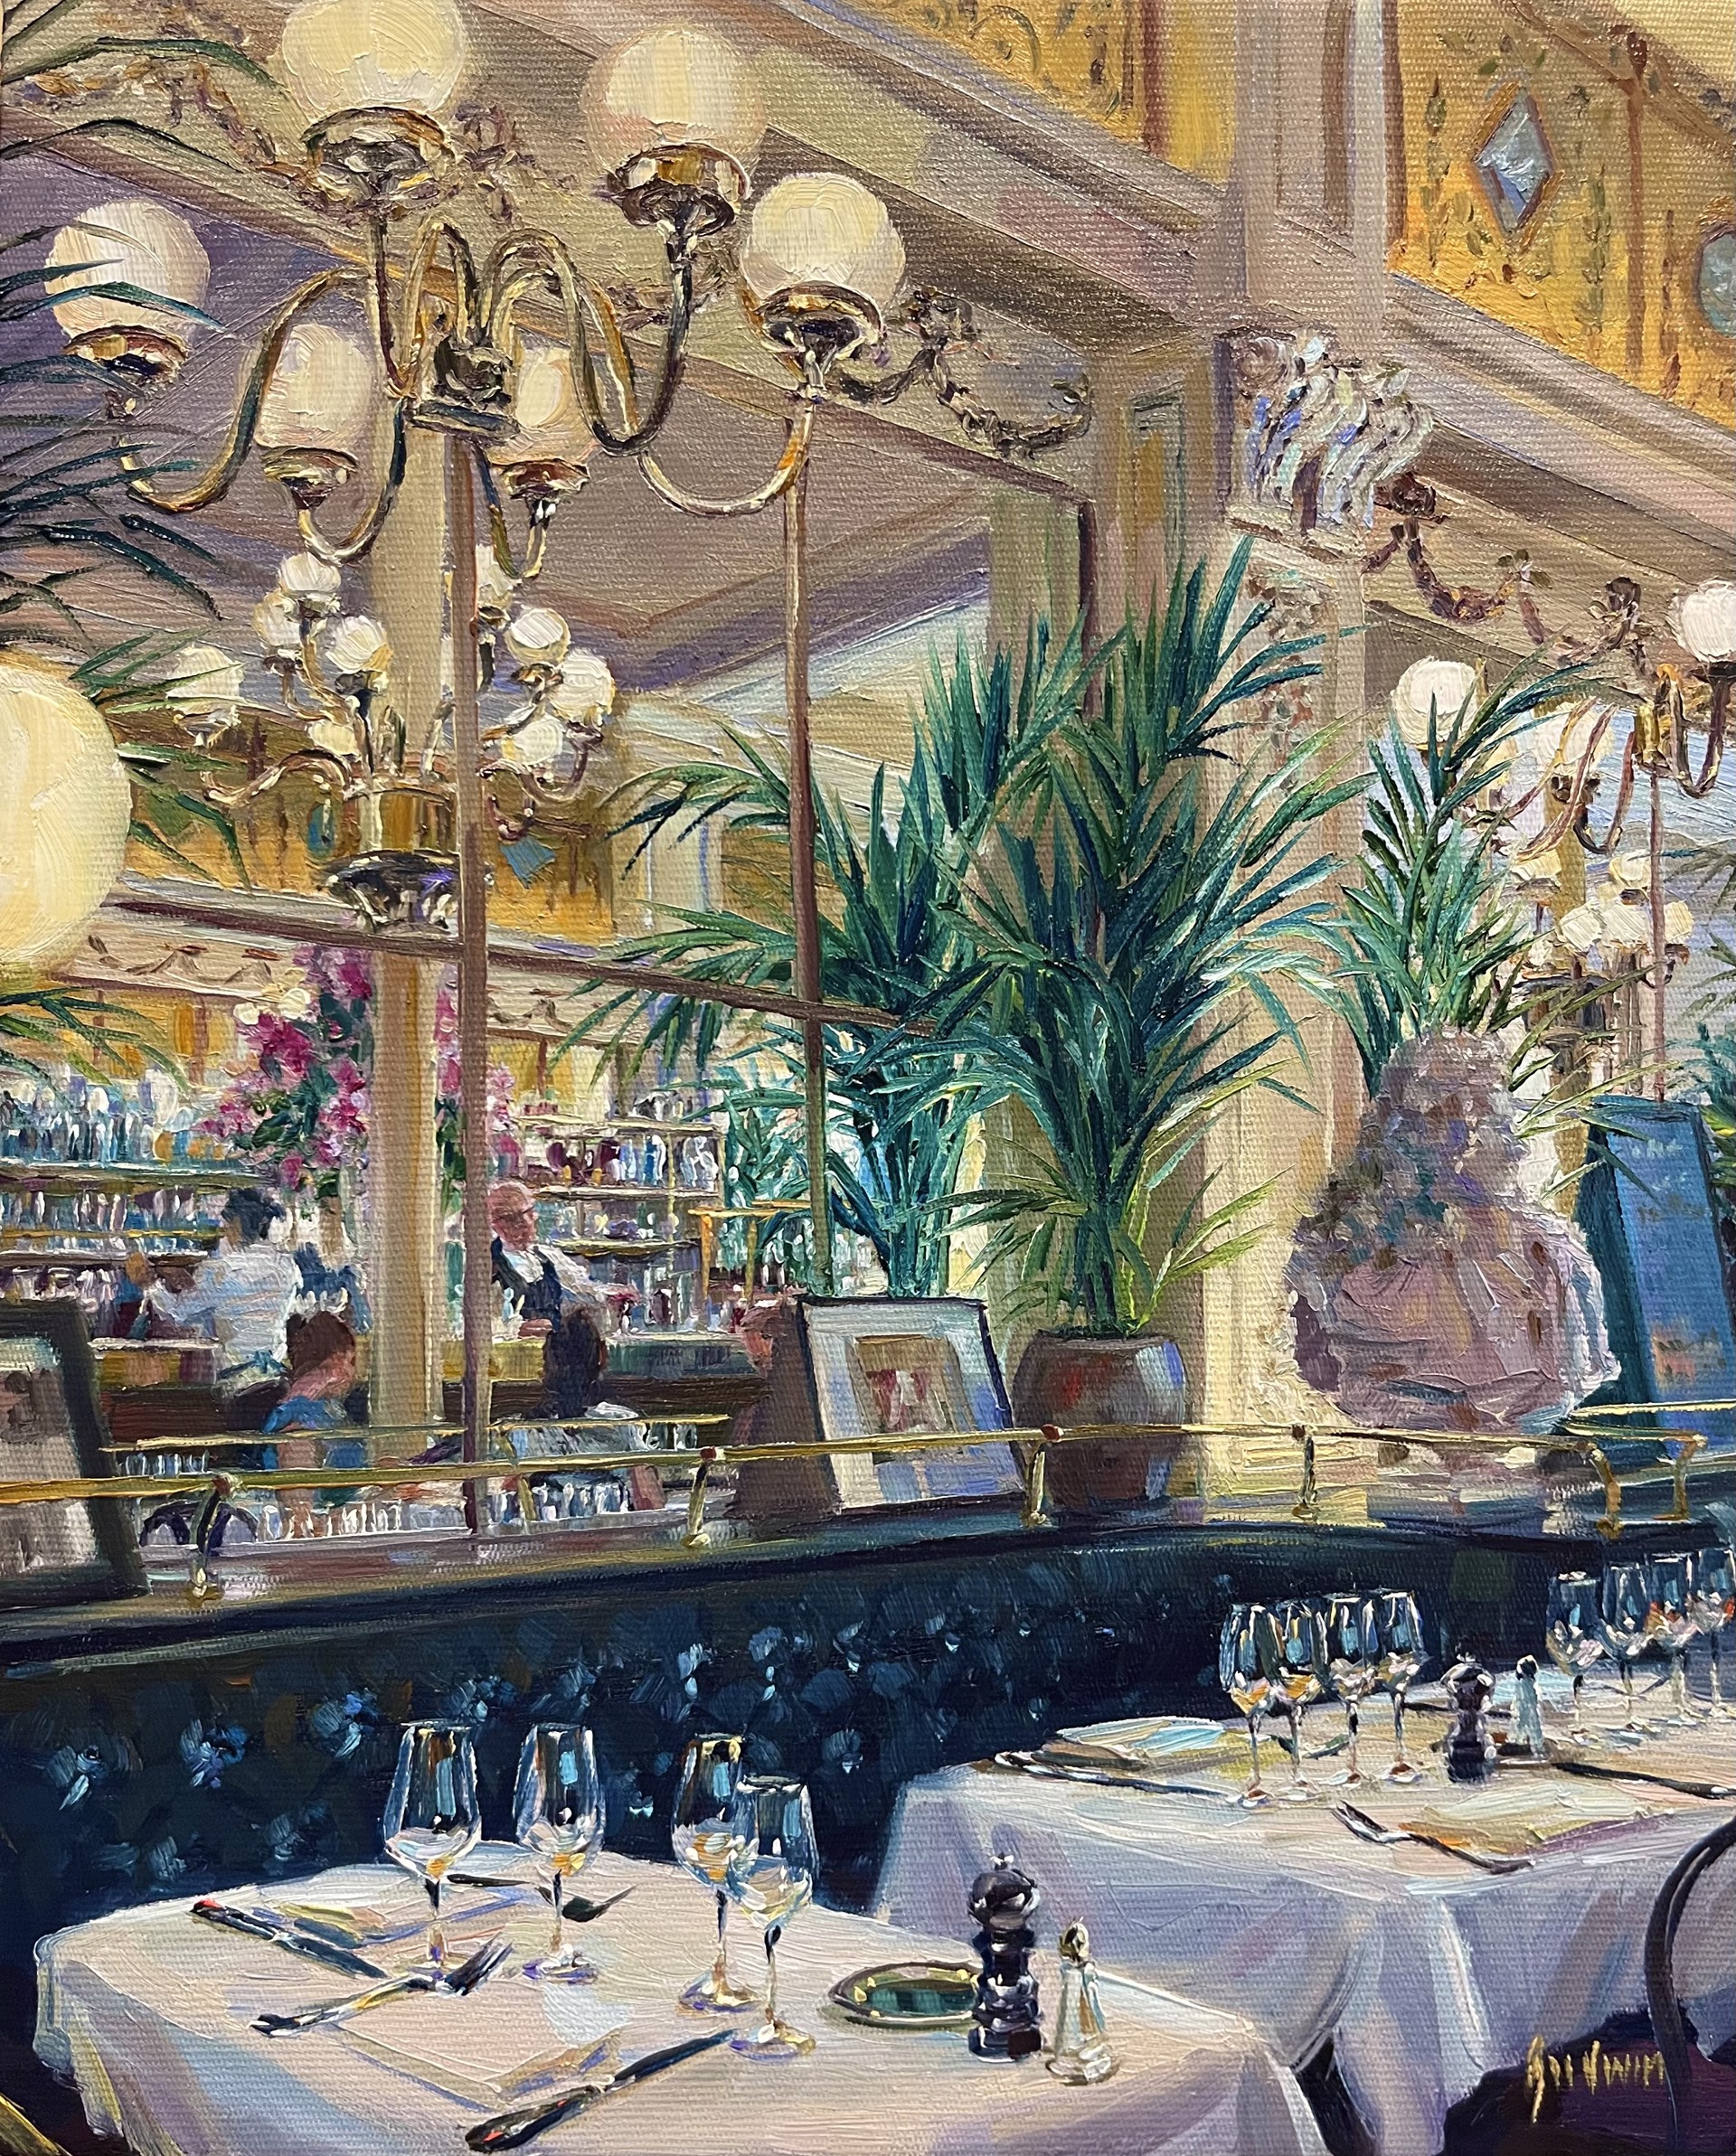 Reflection of the Bar at Le Grand Colbert by Lindsay Goodwin